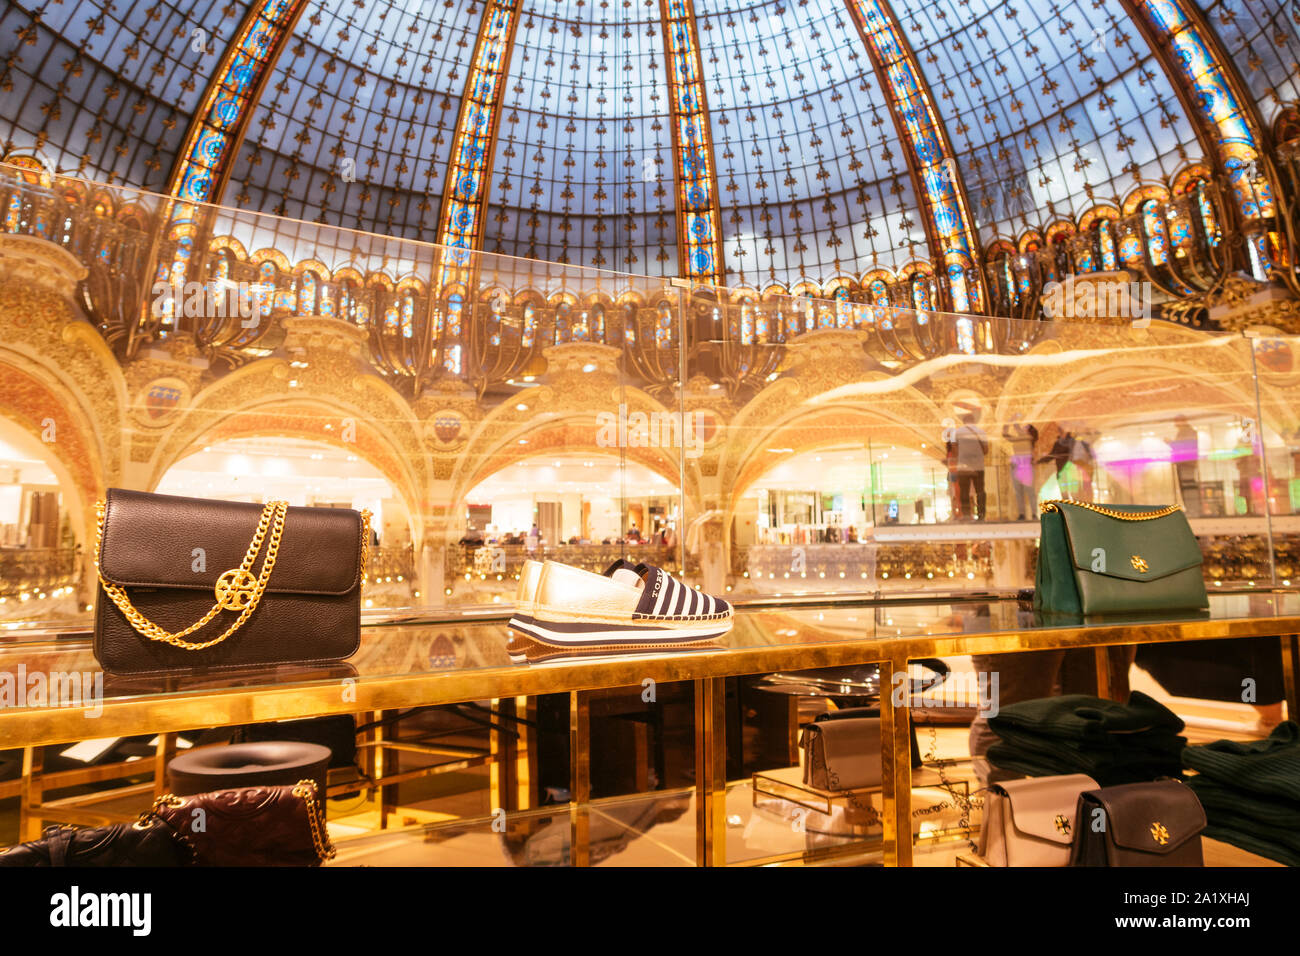 Paris, France - Sept 05, 2019: Luxury goods (Tory Burch) in the Galeries  Lafayette interior in Paris Stock Photo - Alamy